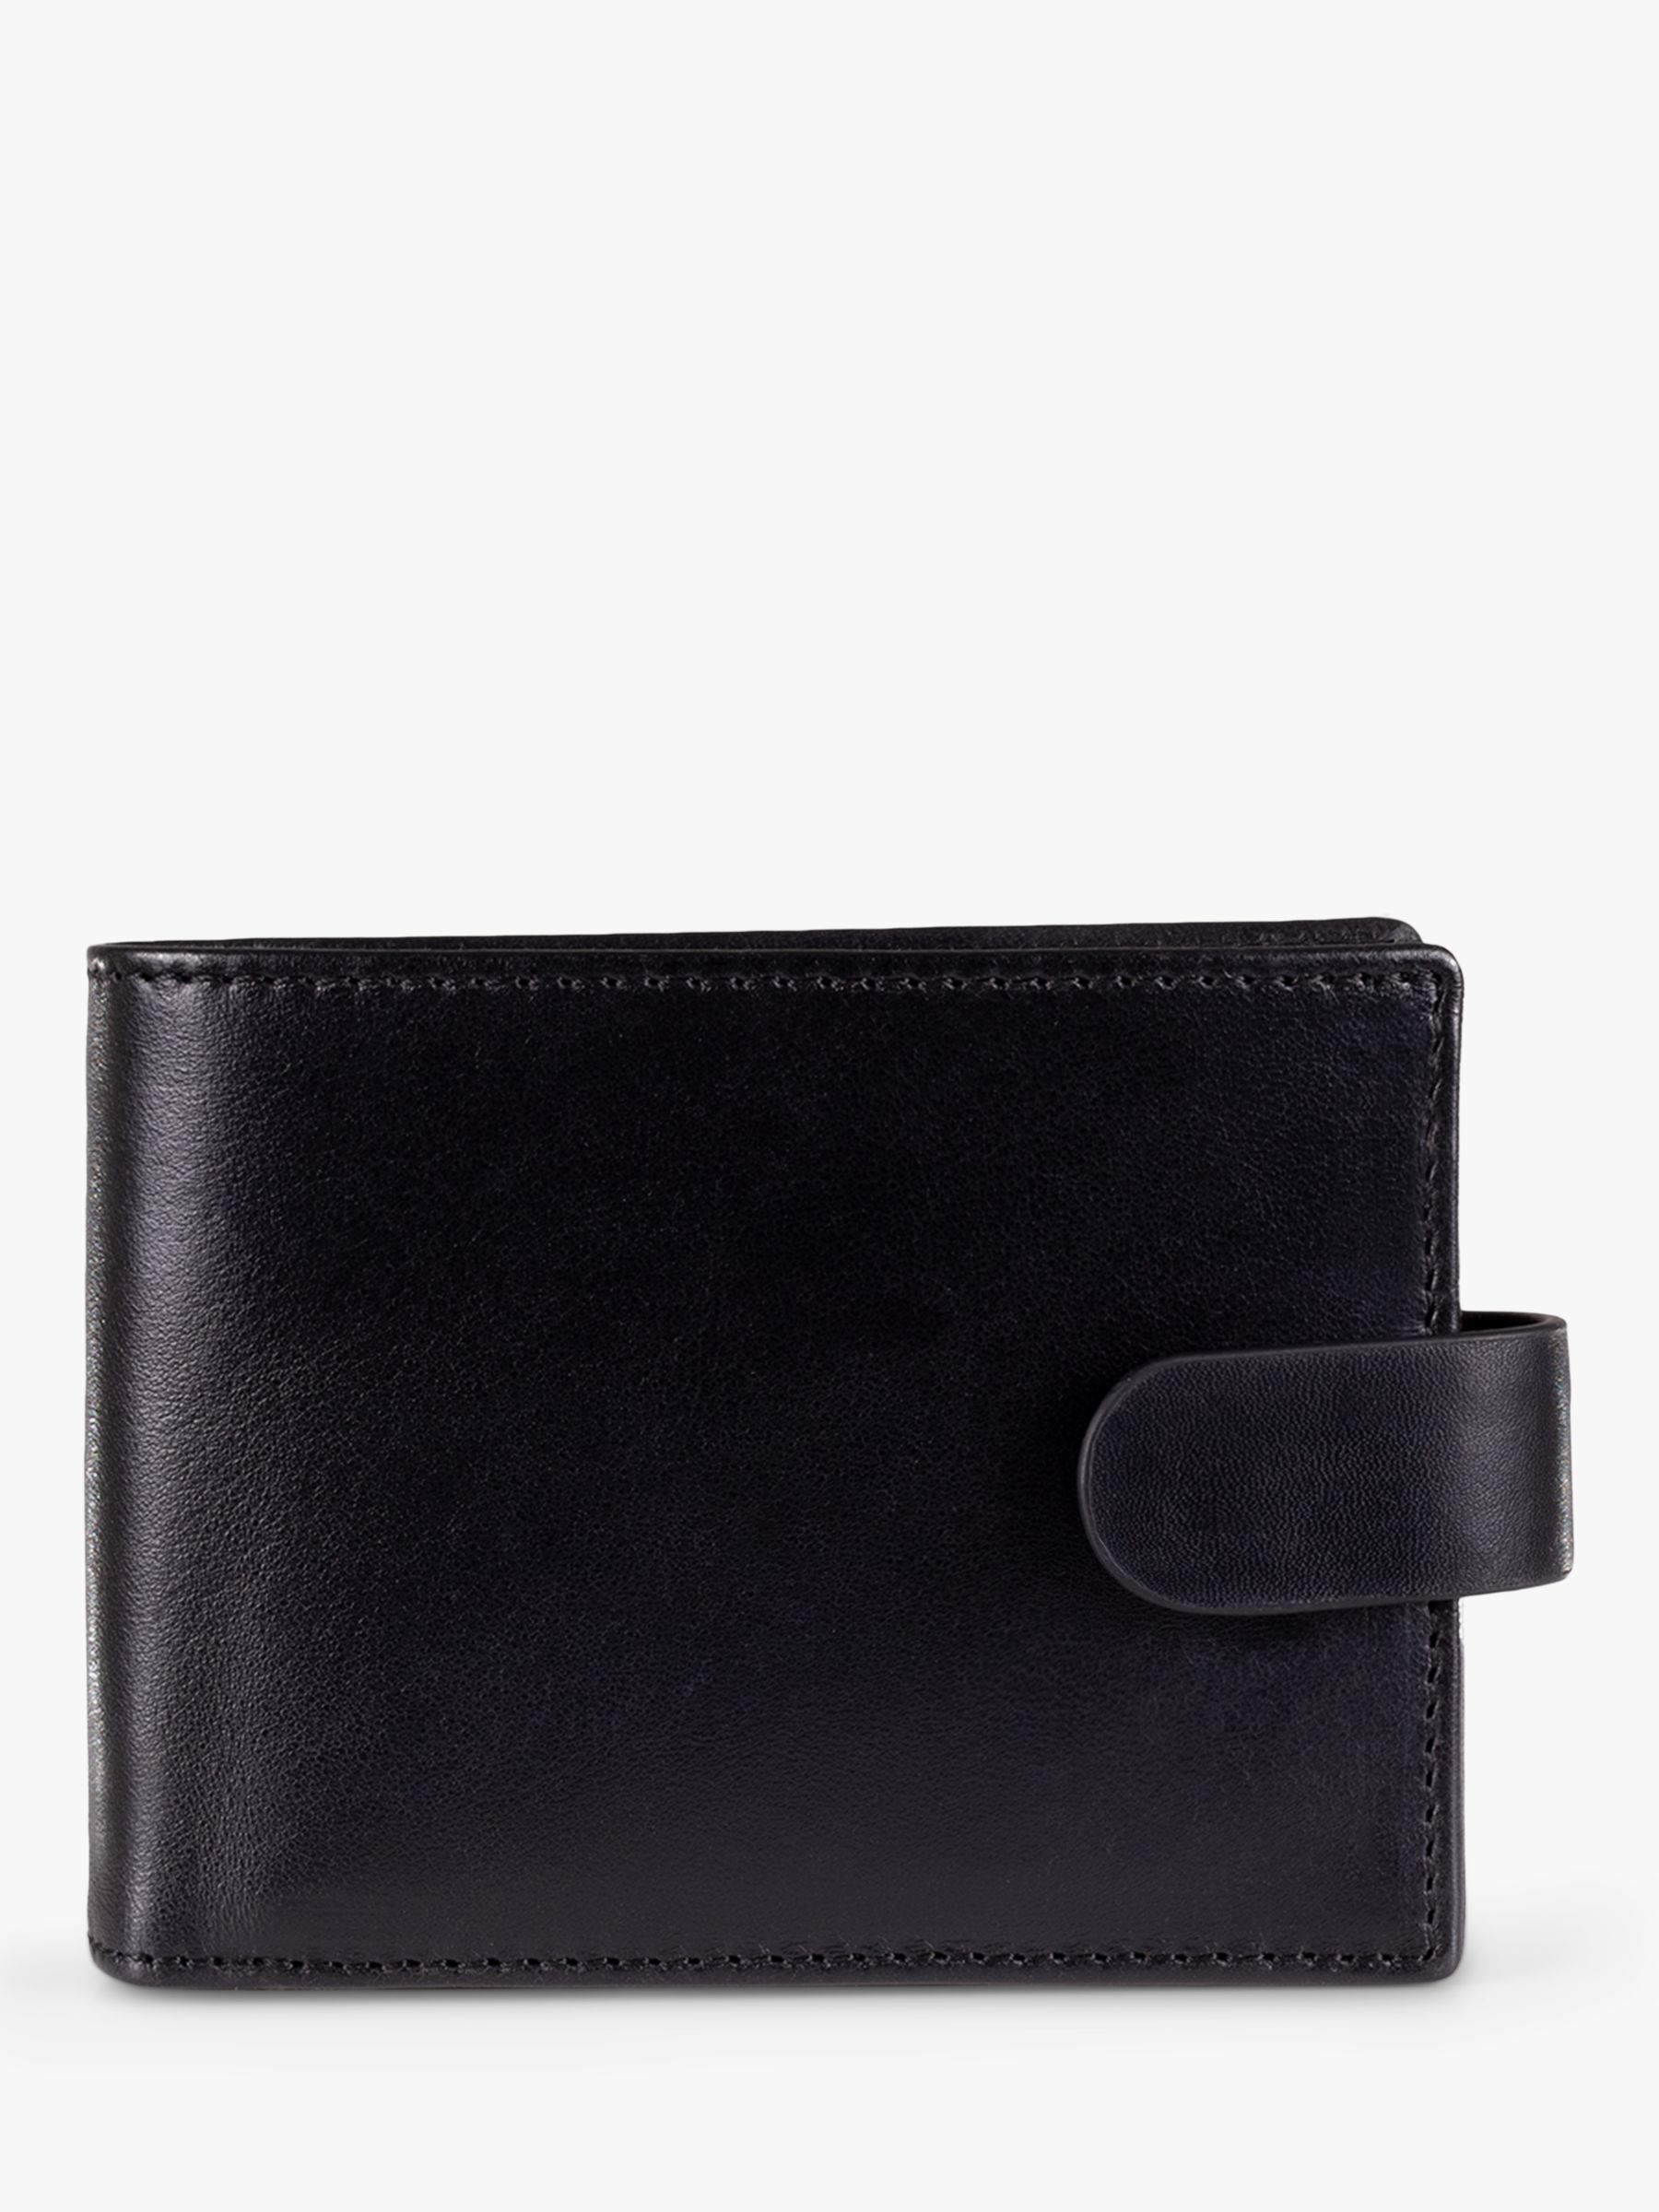 Vegetable Tanned Leather Card Coin Flip Wallet